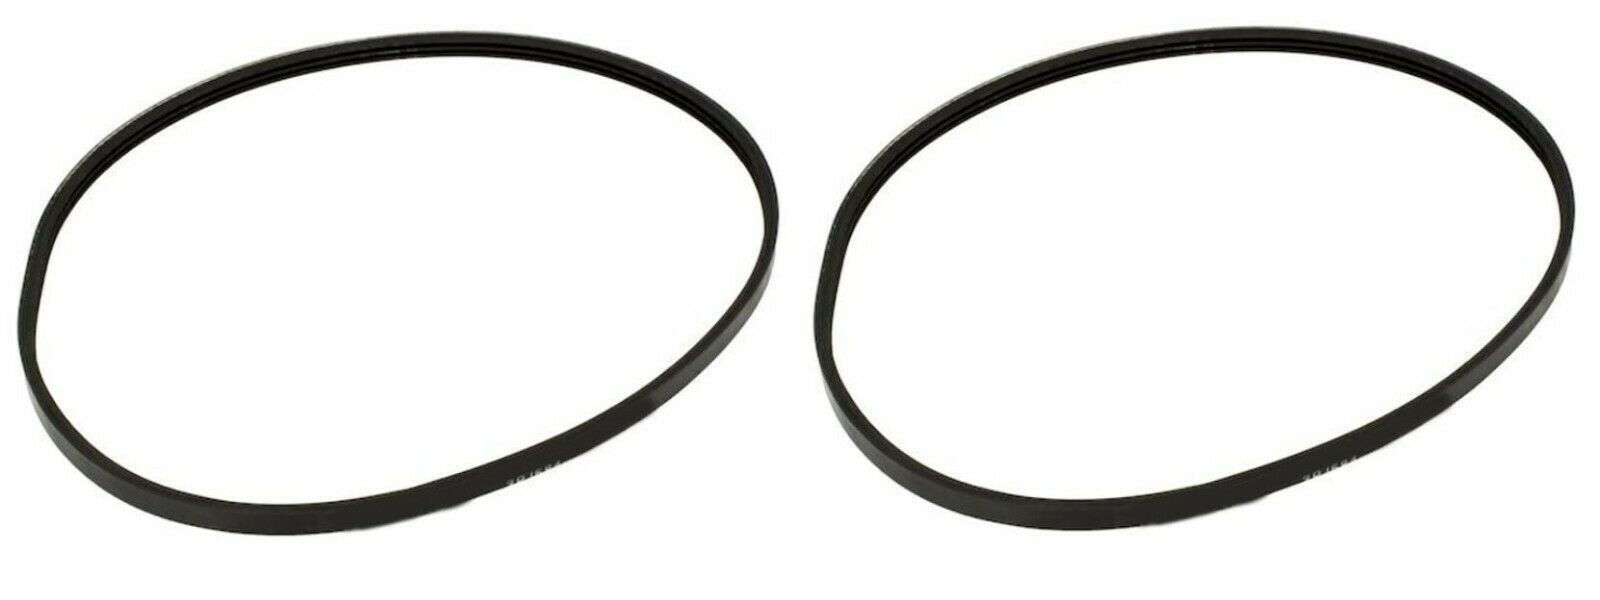 2 Replacement Belt Set for SitNCycle Sit N Cycle Stationary Bike SNC 11